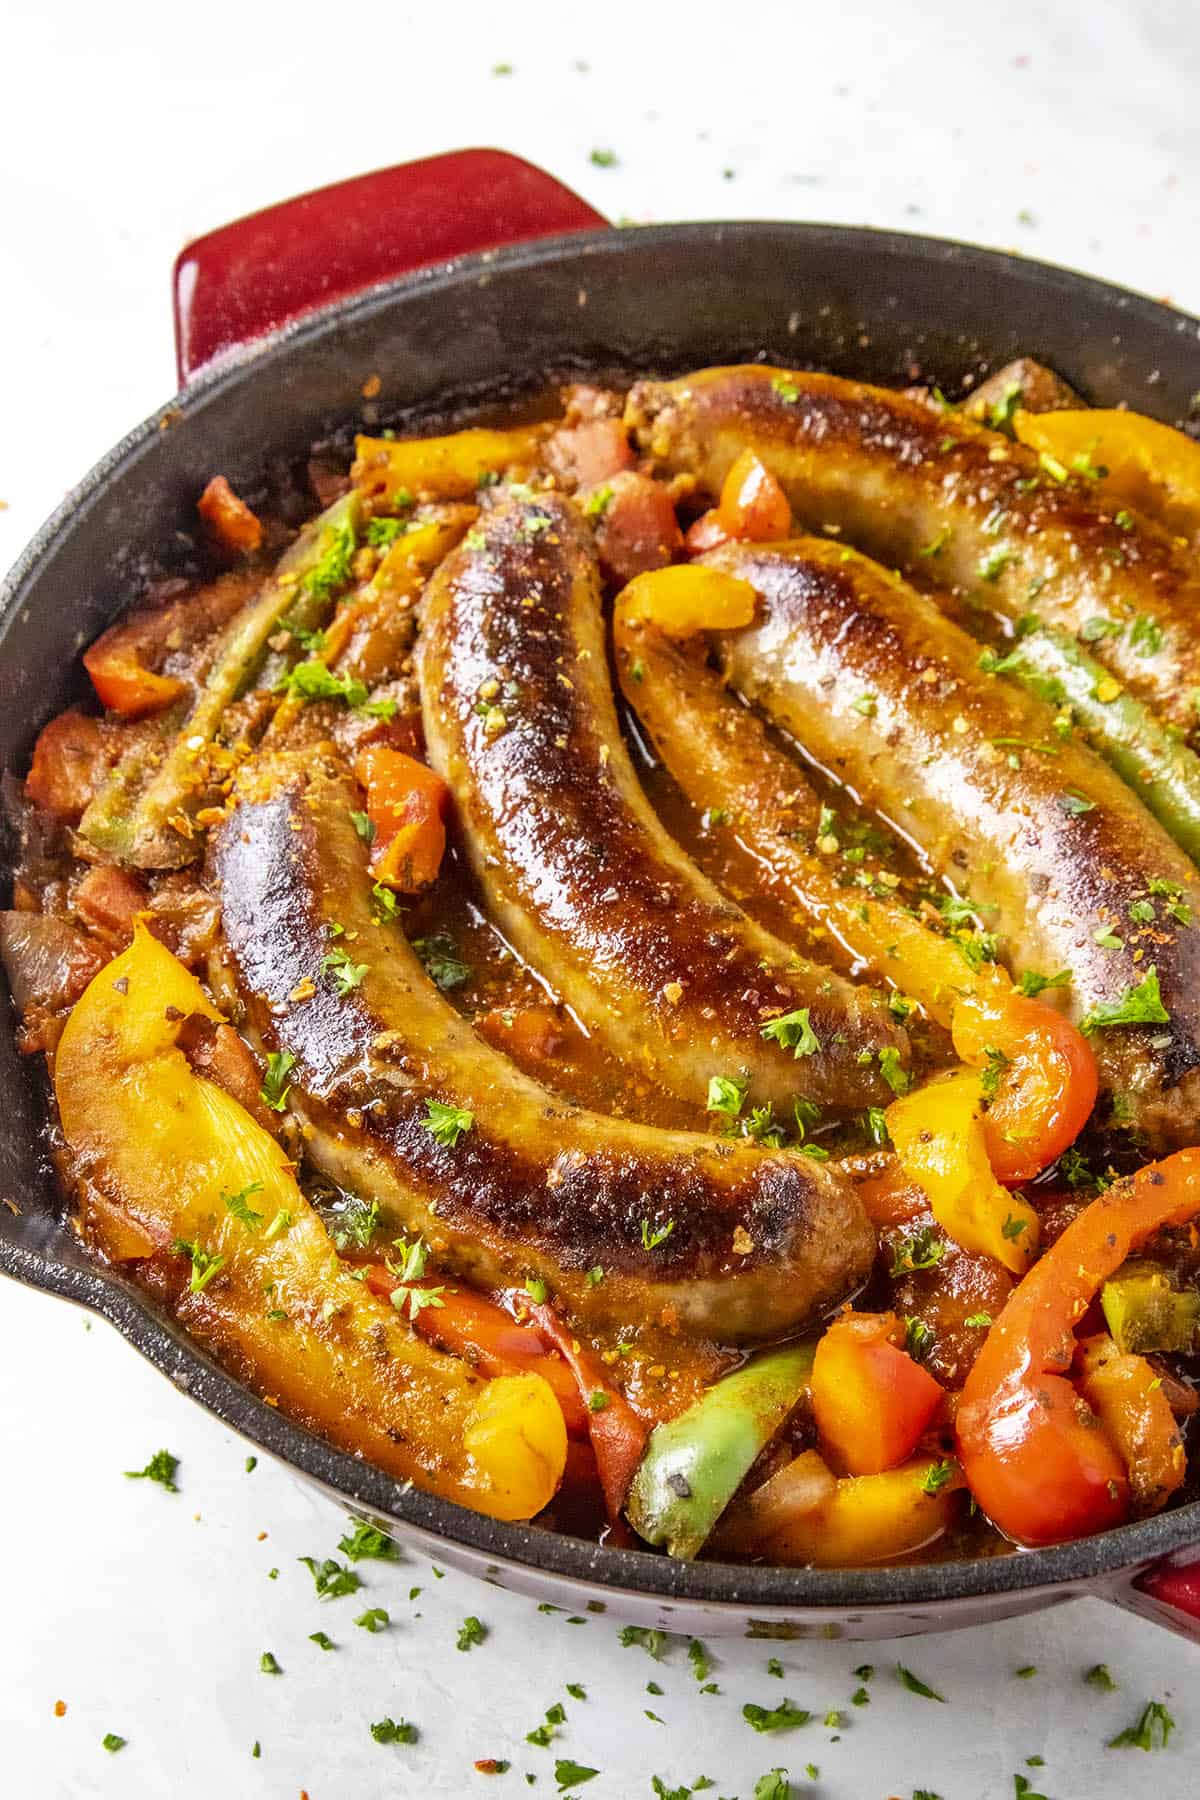 Sausage and Peppers in a hot pan, ready for dinner